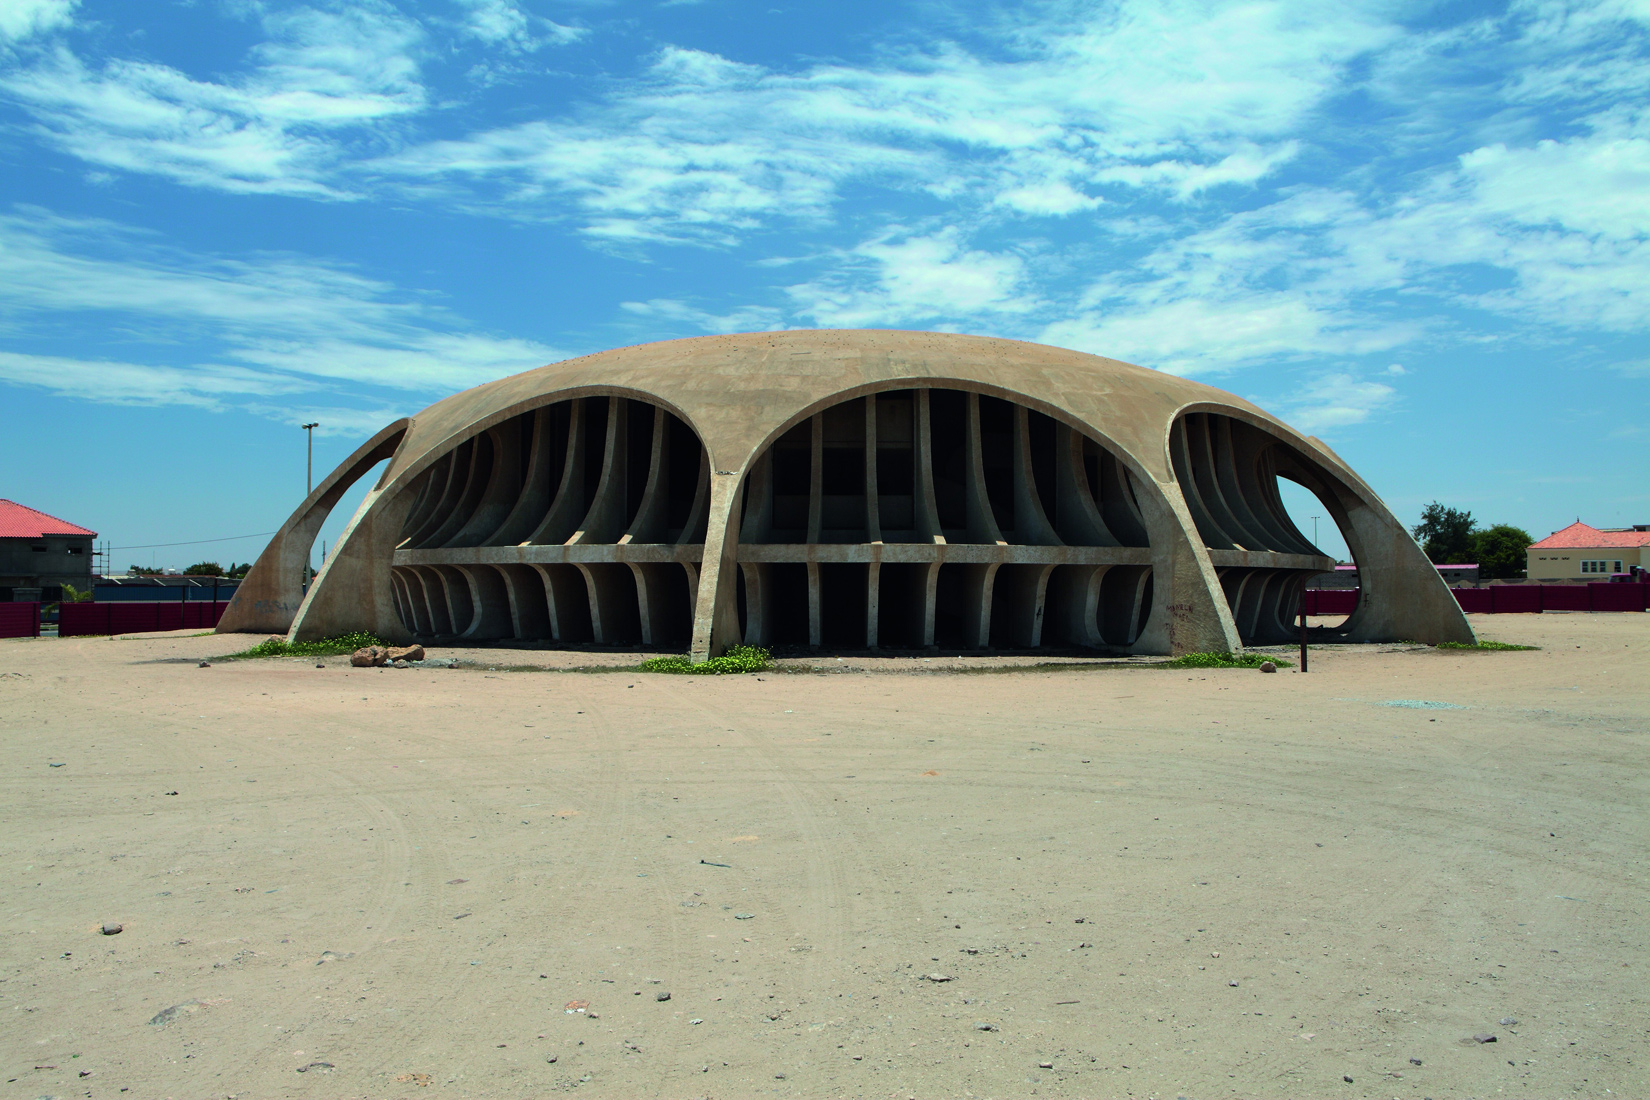 Designed by Botelho Vasconcelos of Atelier Boper, Cine Estudio in Namibe, Provincia Namibe, was never completed. While it currently lies in poor condition, a rehabilitation project is underway. Photography: Walter Fernandes/Goethe-Institut Angola